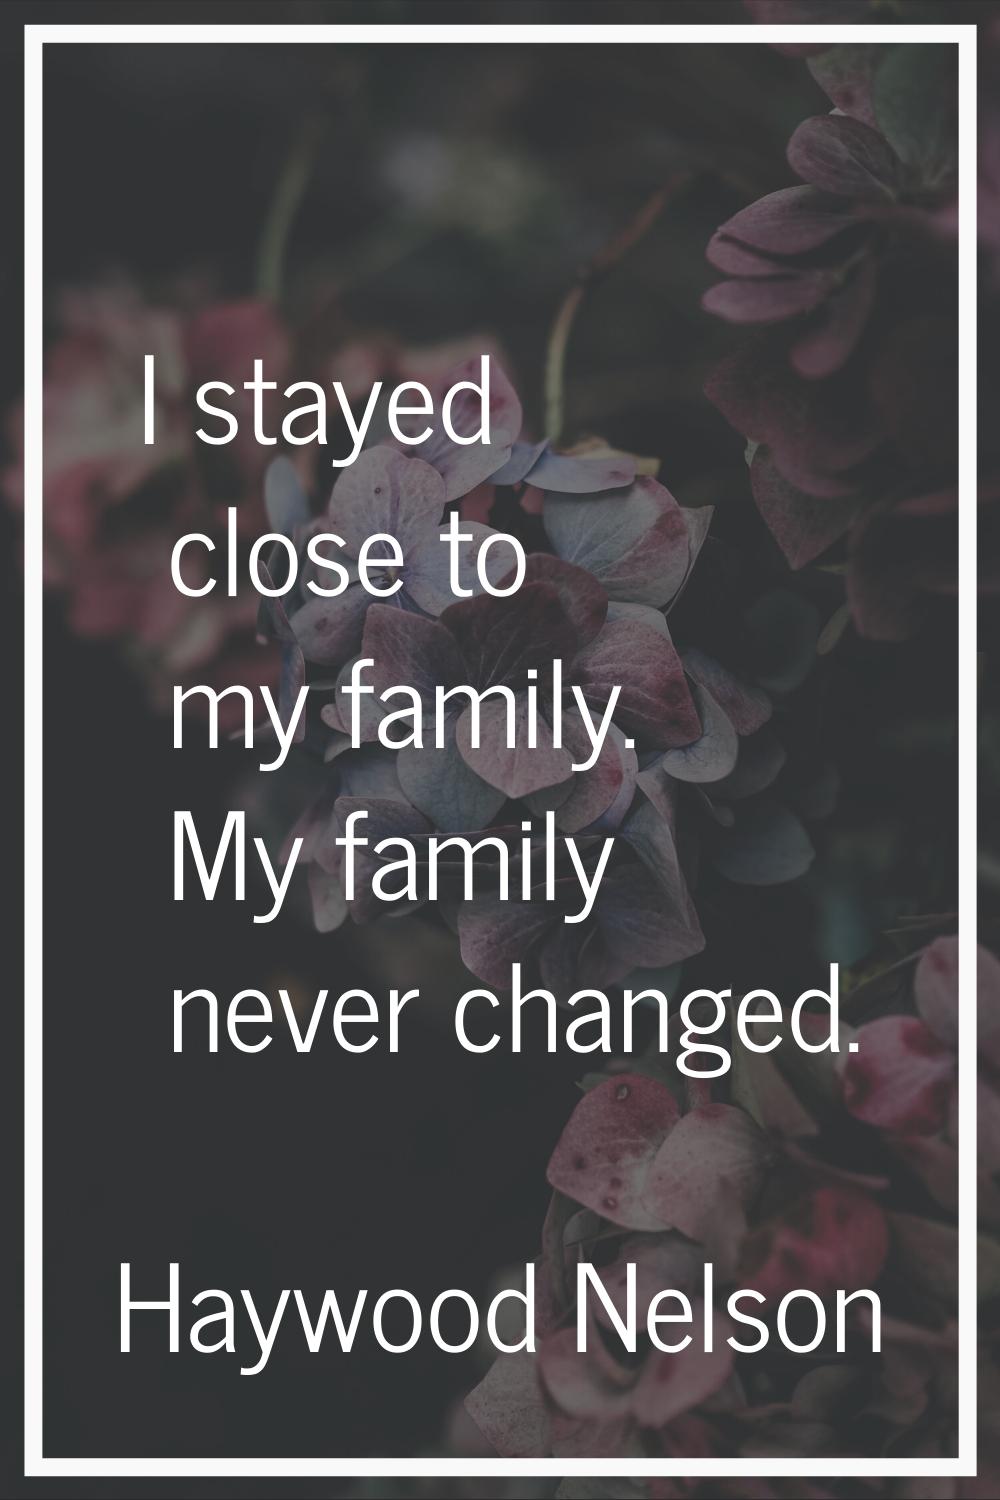 I stayed close to my family. My family never changed.